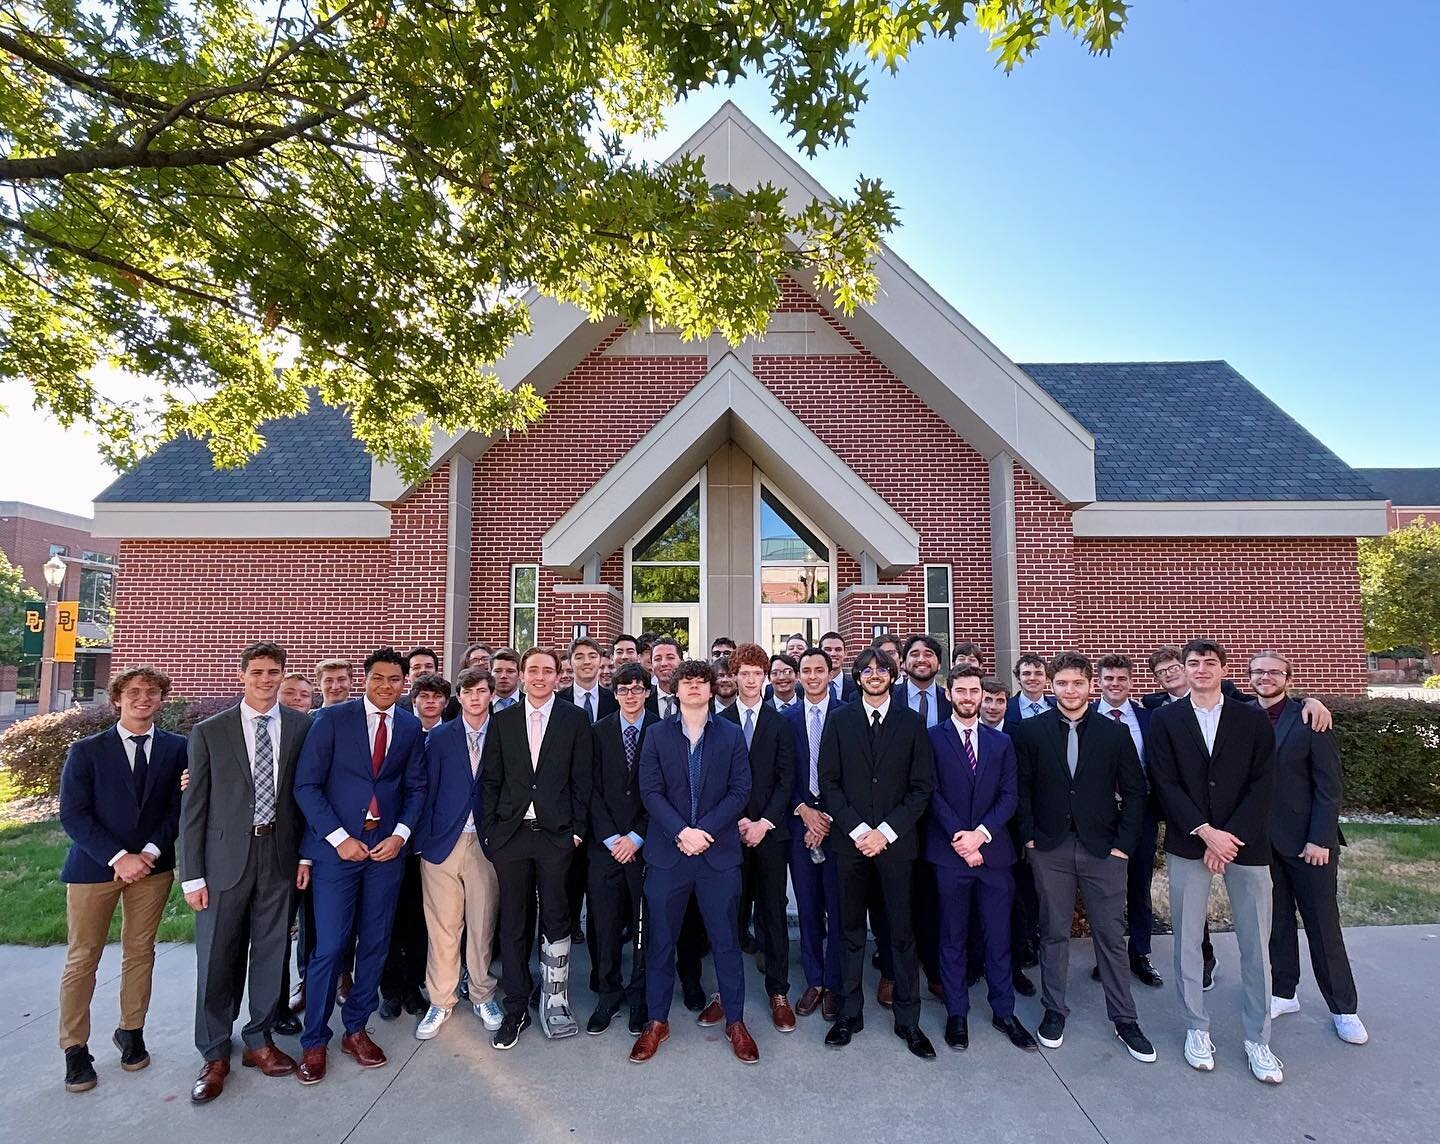 Bright and early this morning, we inducted 12 new members! Marking the end of our Fall 2023 Recruitment process. Congratulations to these men on their induction into the Delta Psi Chapter! #rushbeta